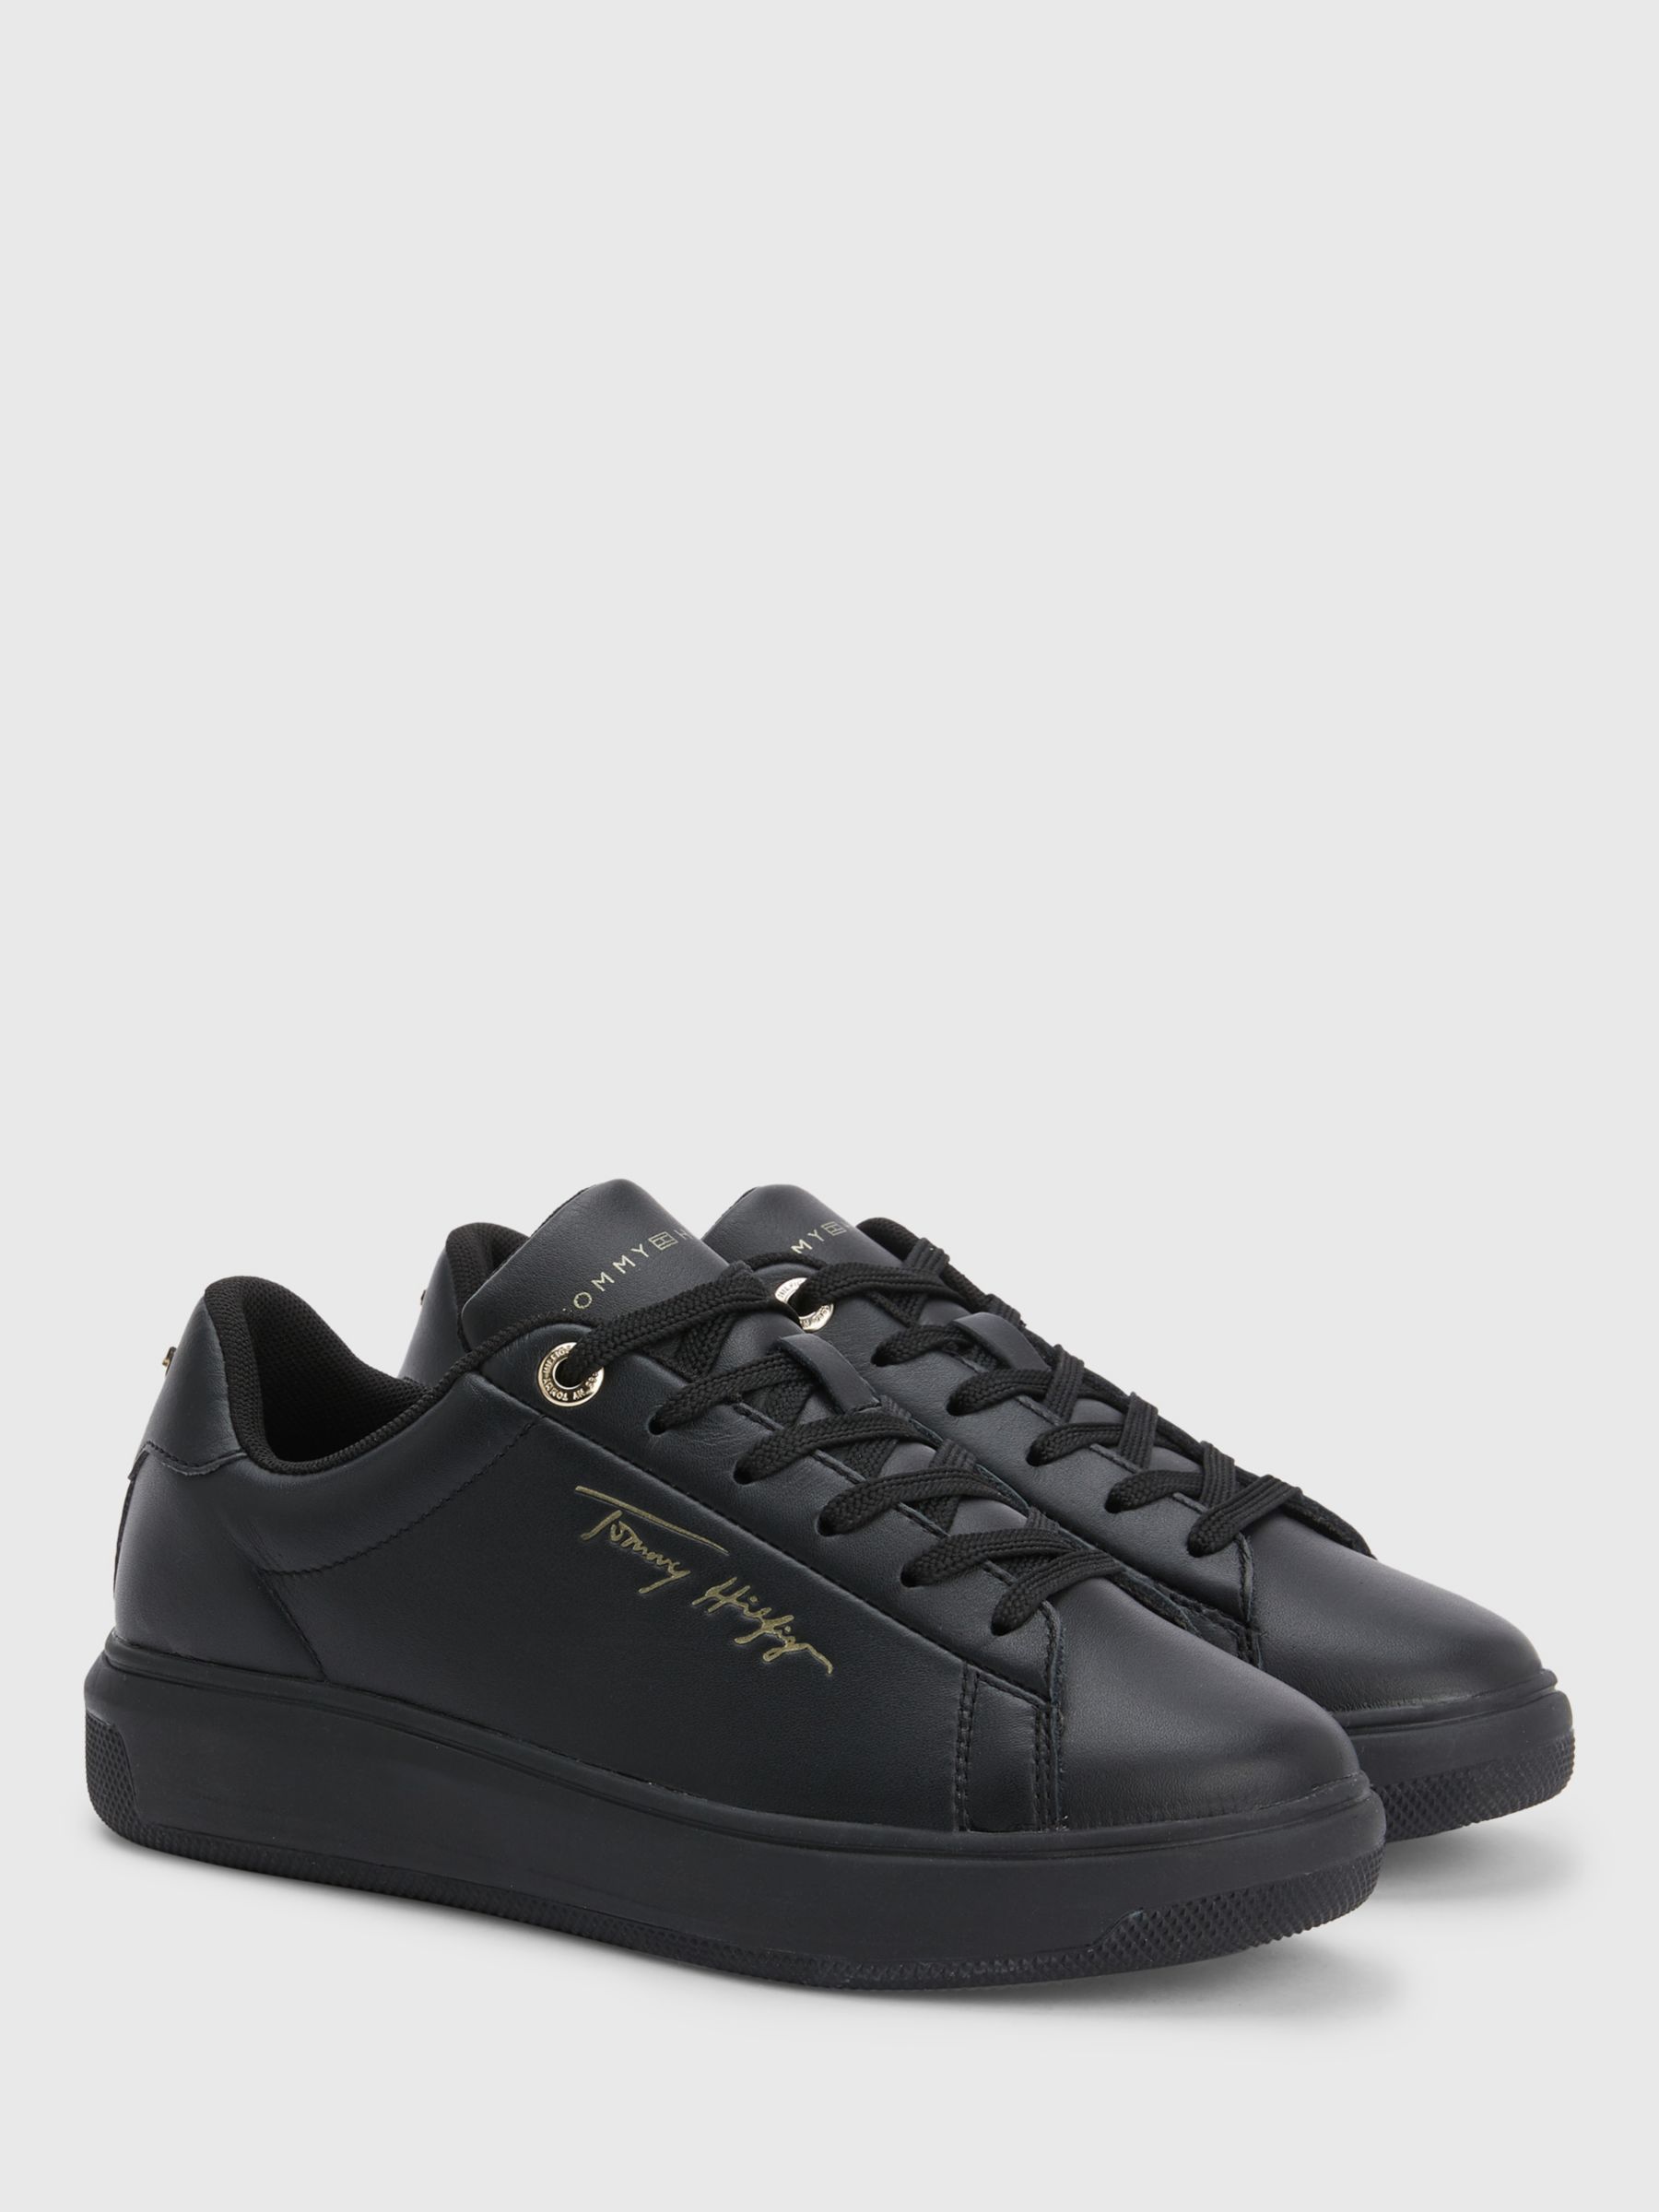 Tommy Hilfiger Signature Leather Trainers, Black at John Lewis & Partners